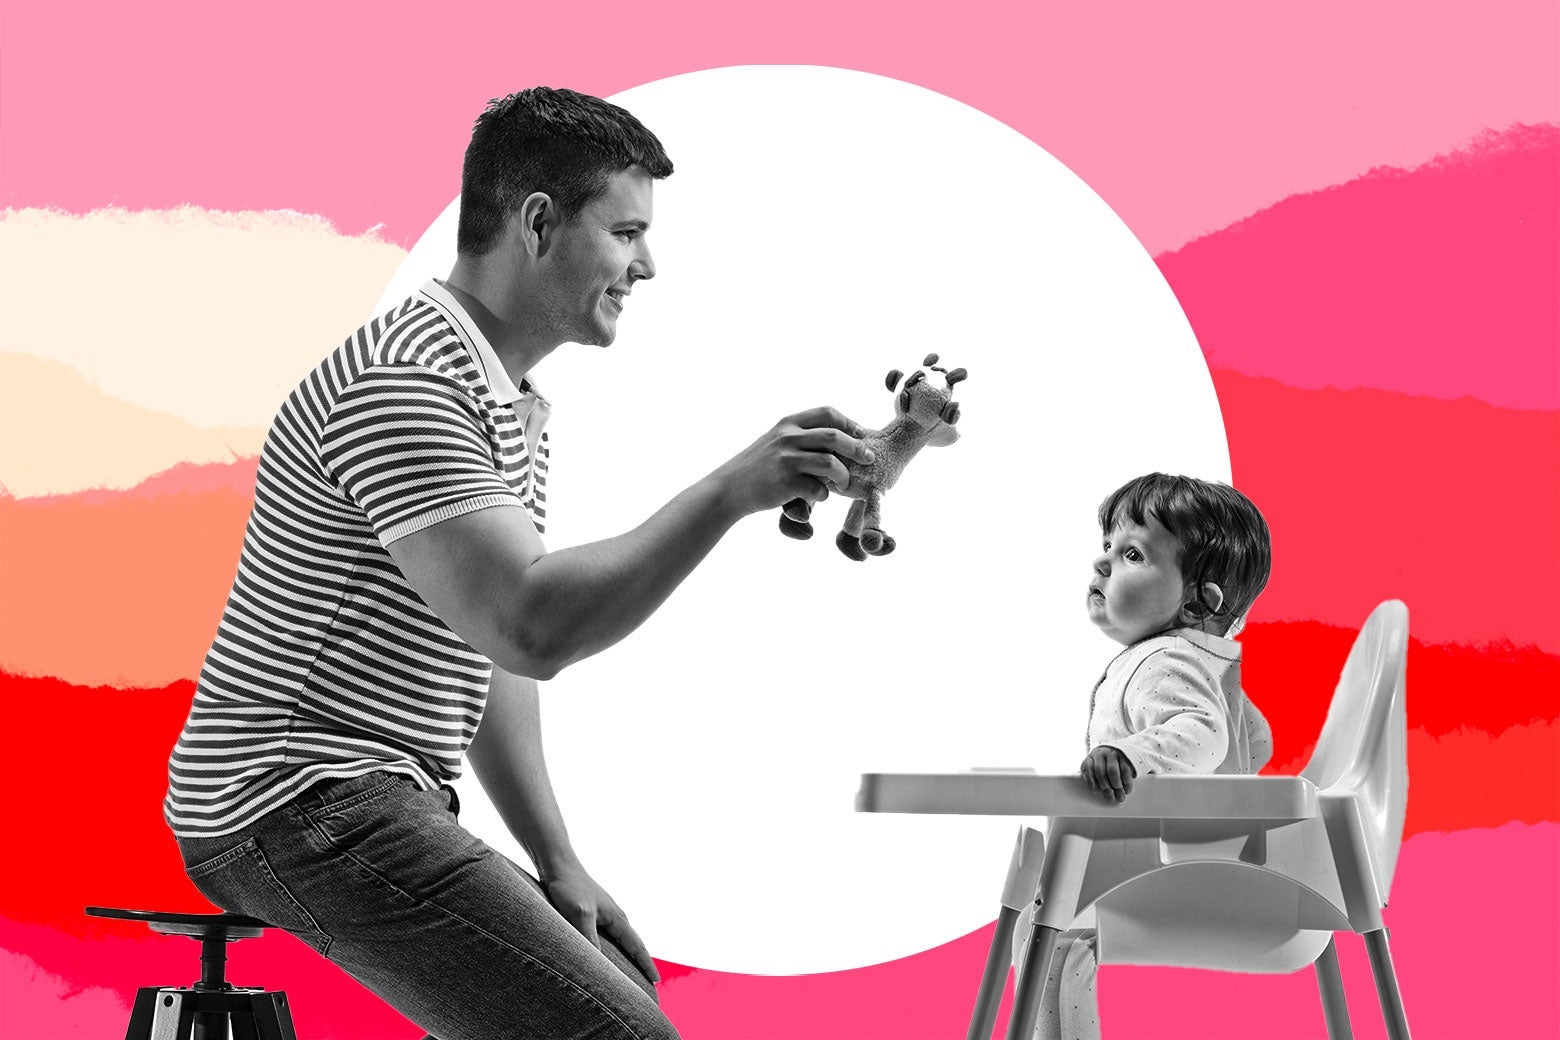 A father holds up a stuffed giraffe toy in front of a baby in a highchair